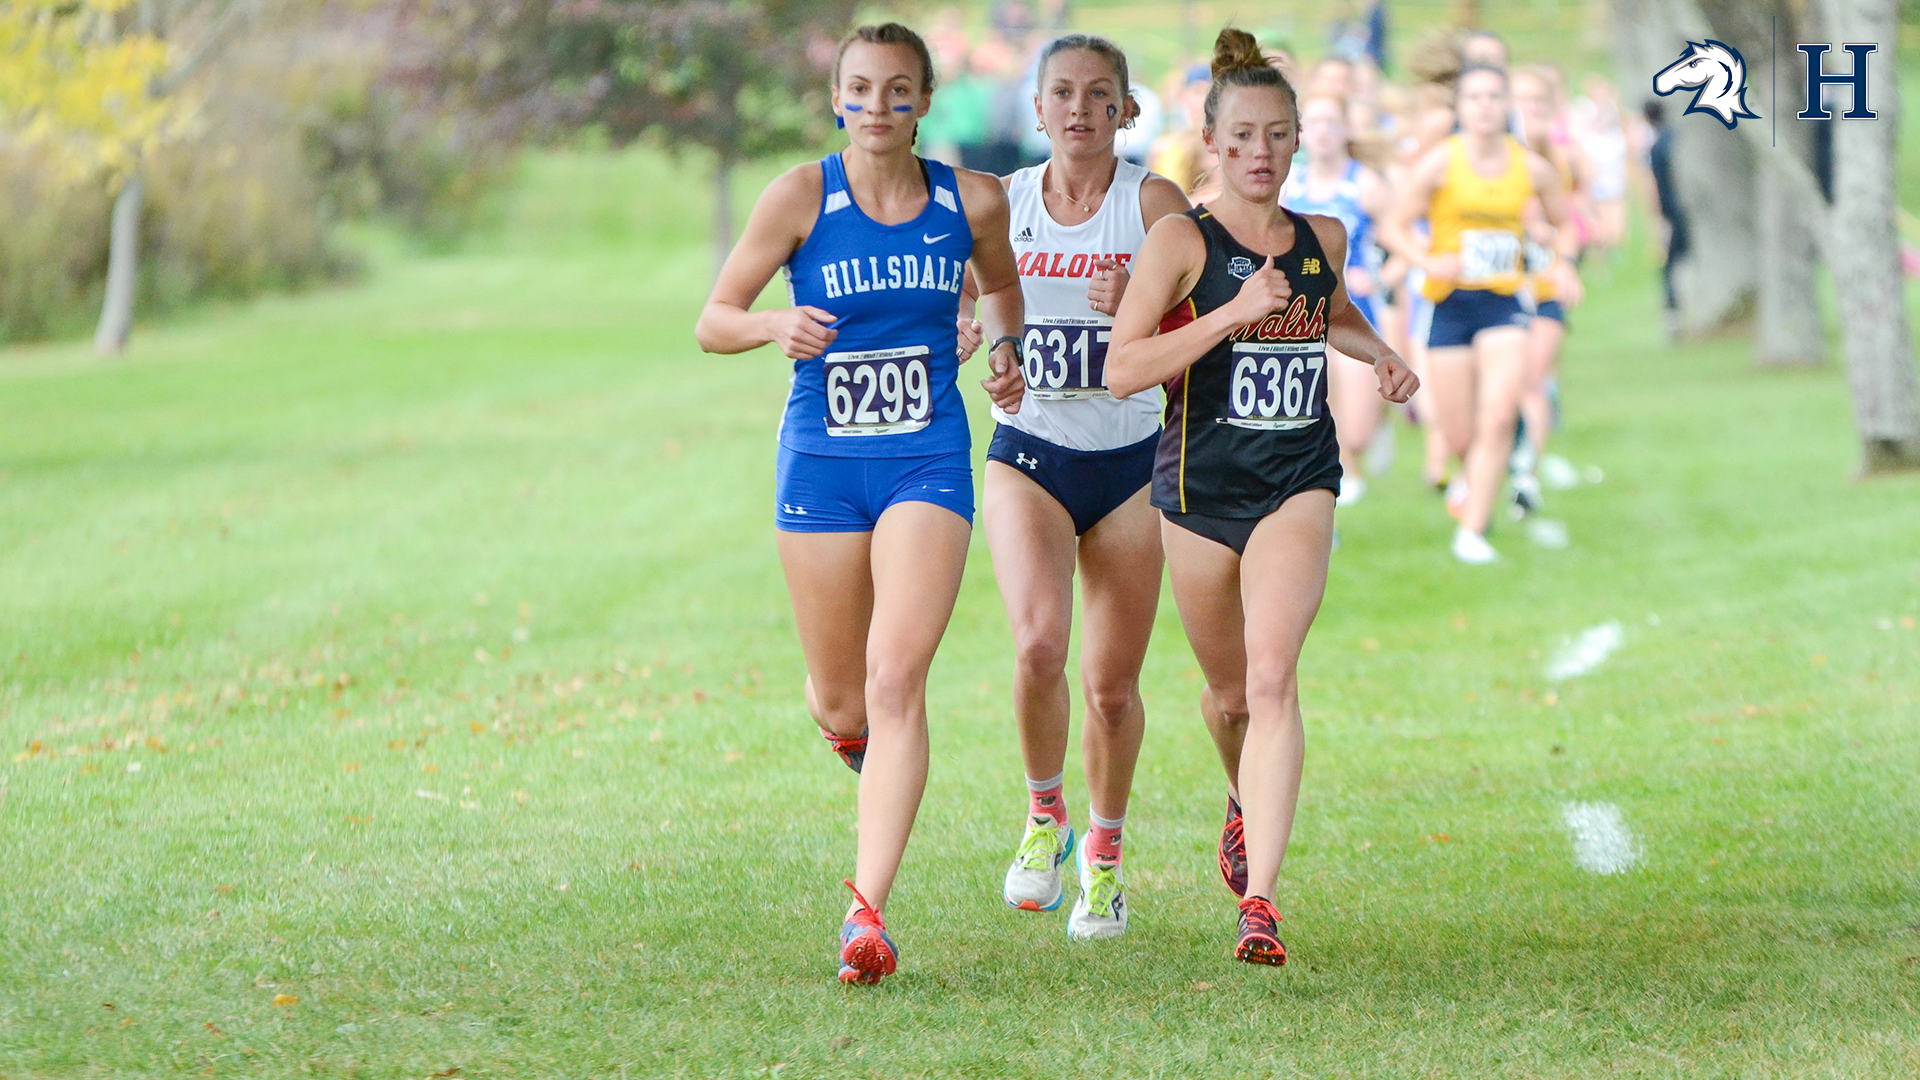 Charger women place third at G-MAC Championships; Wamsley earns first-team All-G-MAC honors